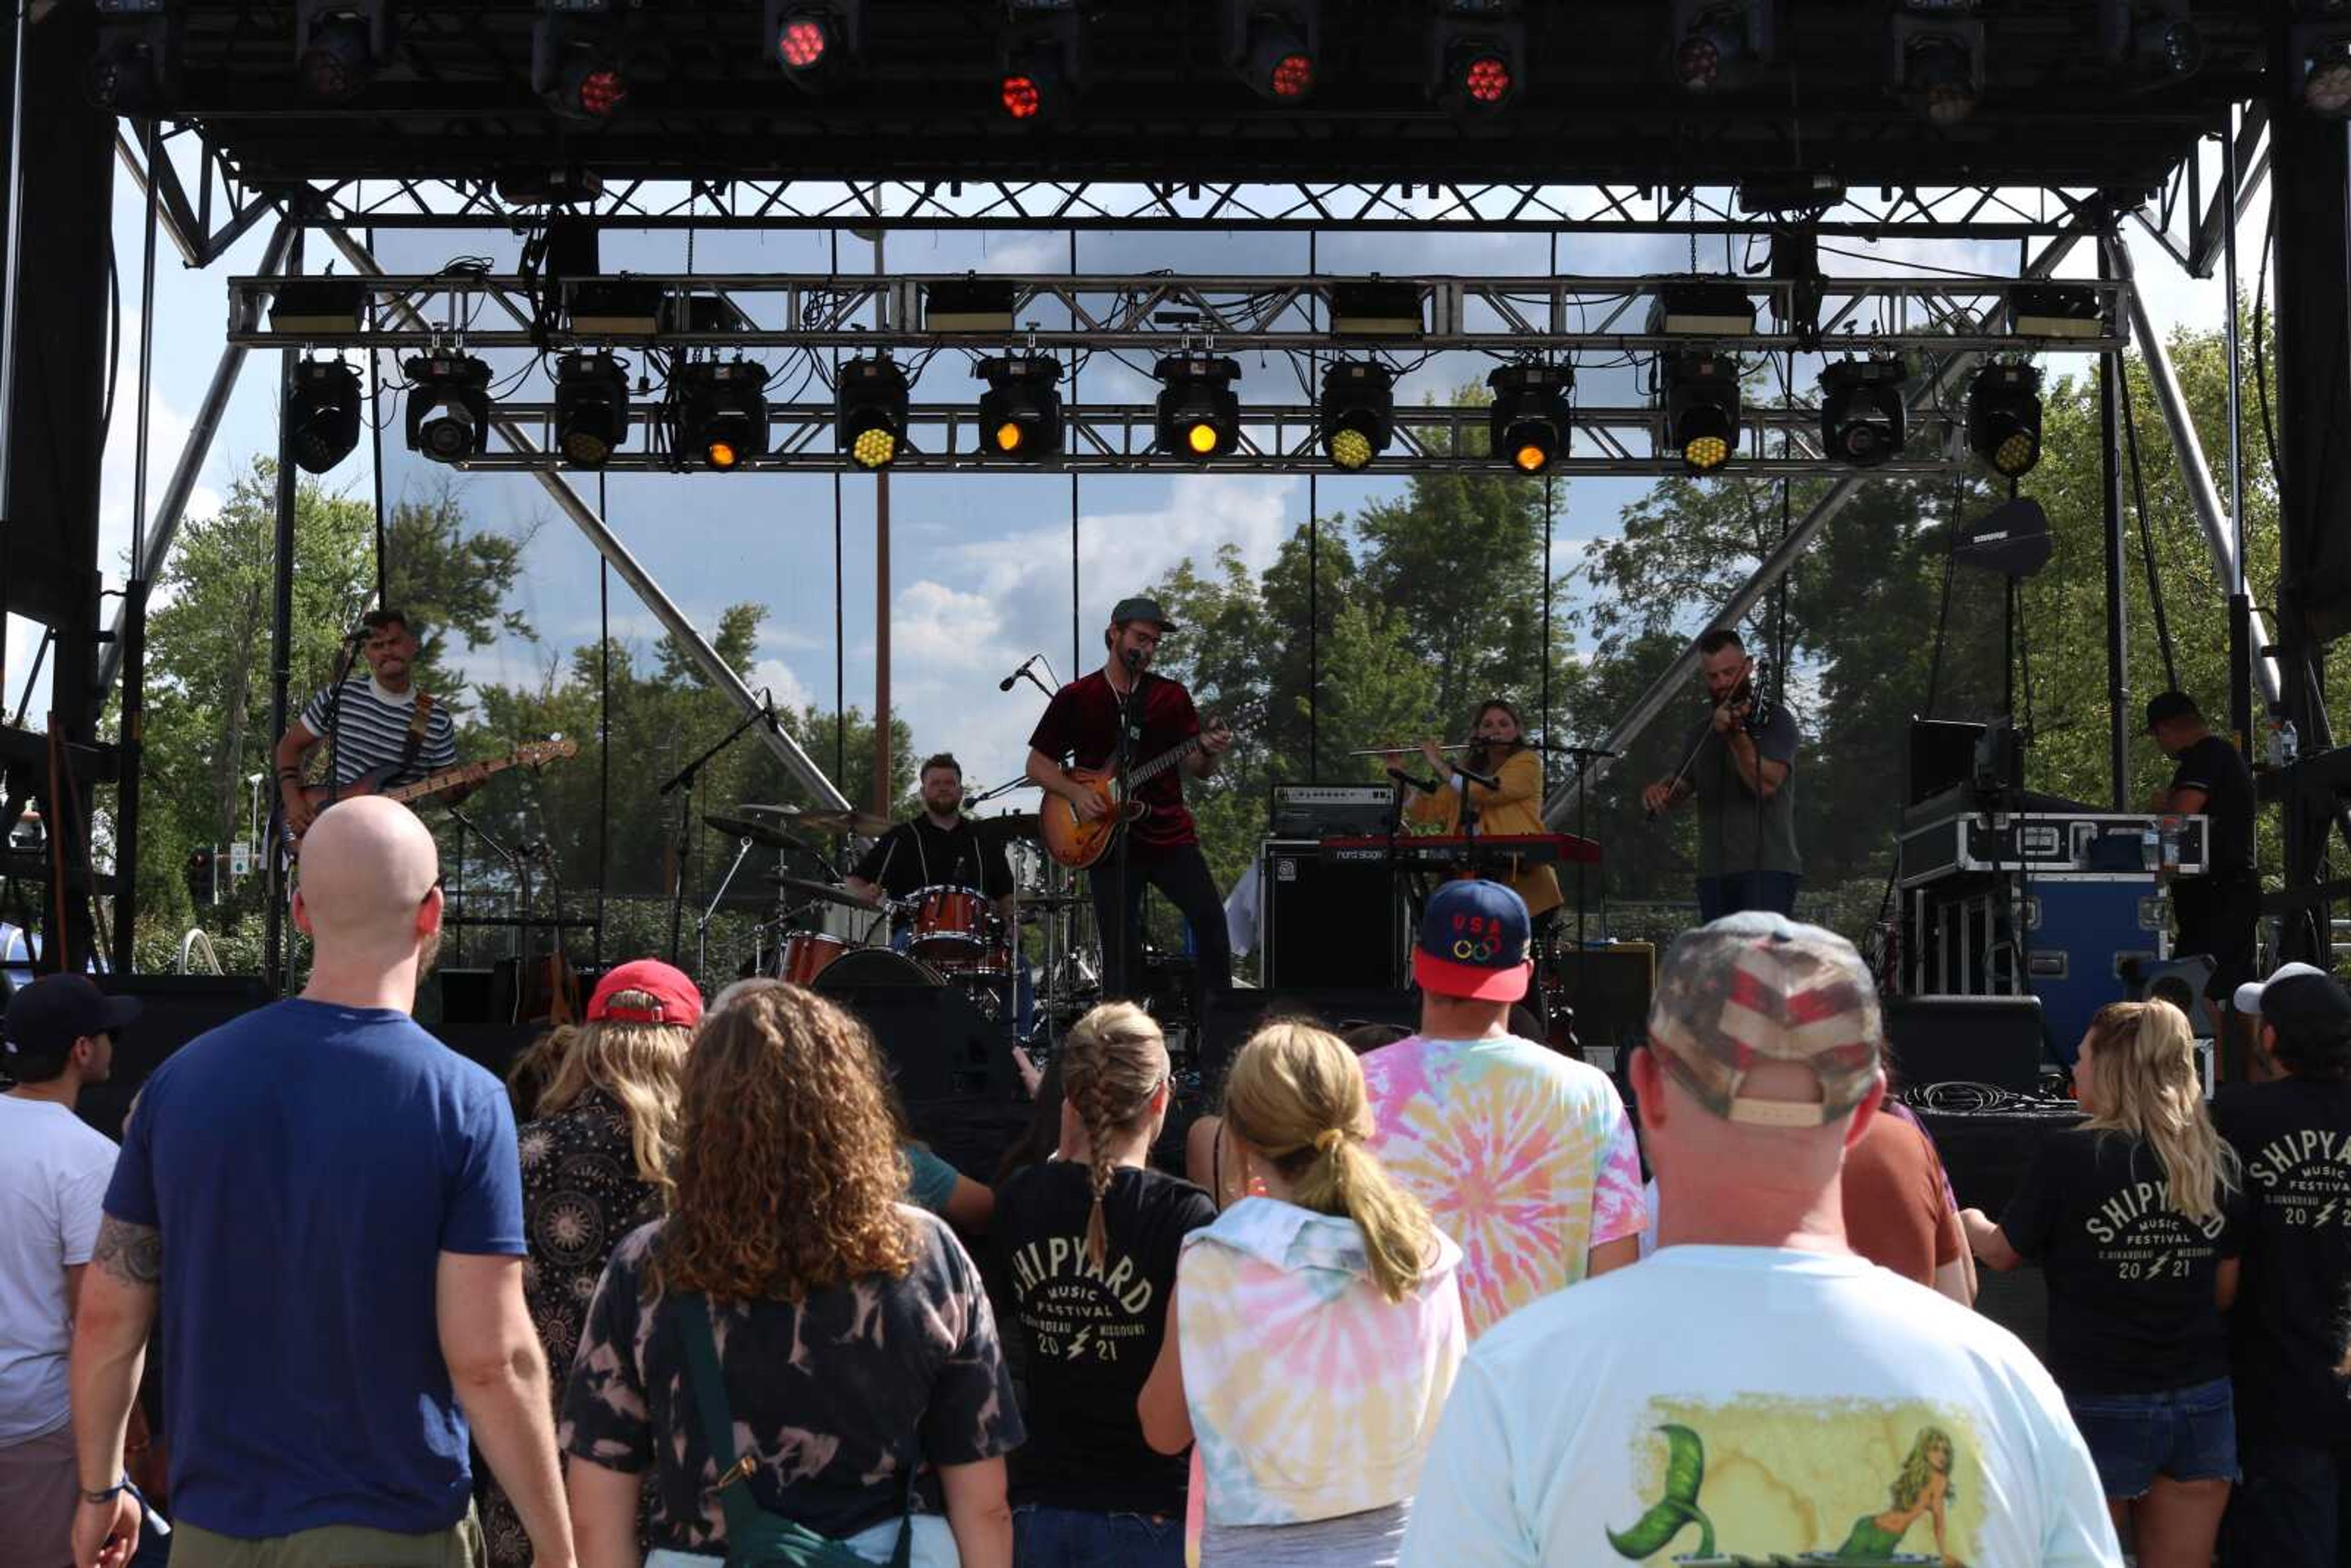 Bluegrass band, Dawson Hollow, performs at the Shipyard Music Festival on Saturday, September 18th. The band played at the 2019 Shipyard Music Festival and many festival attendees were happy to see the band return.